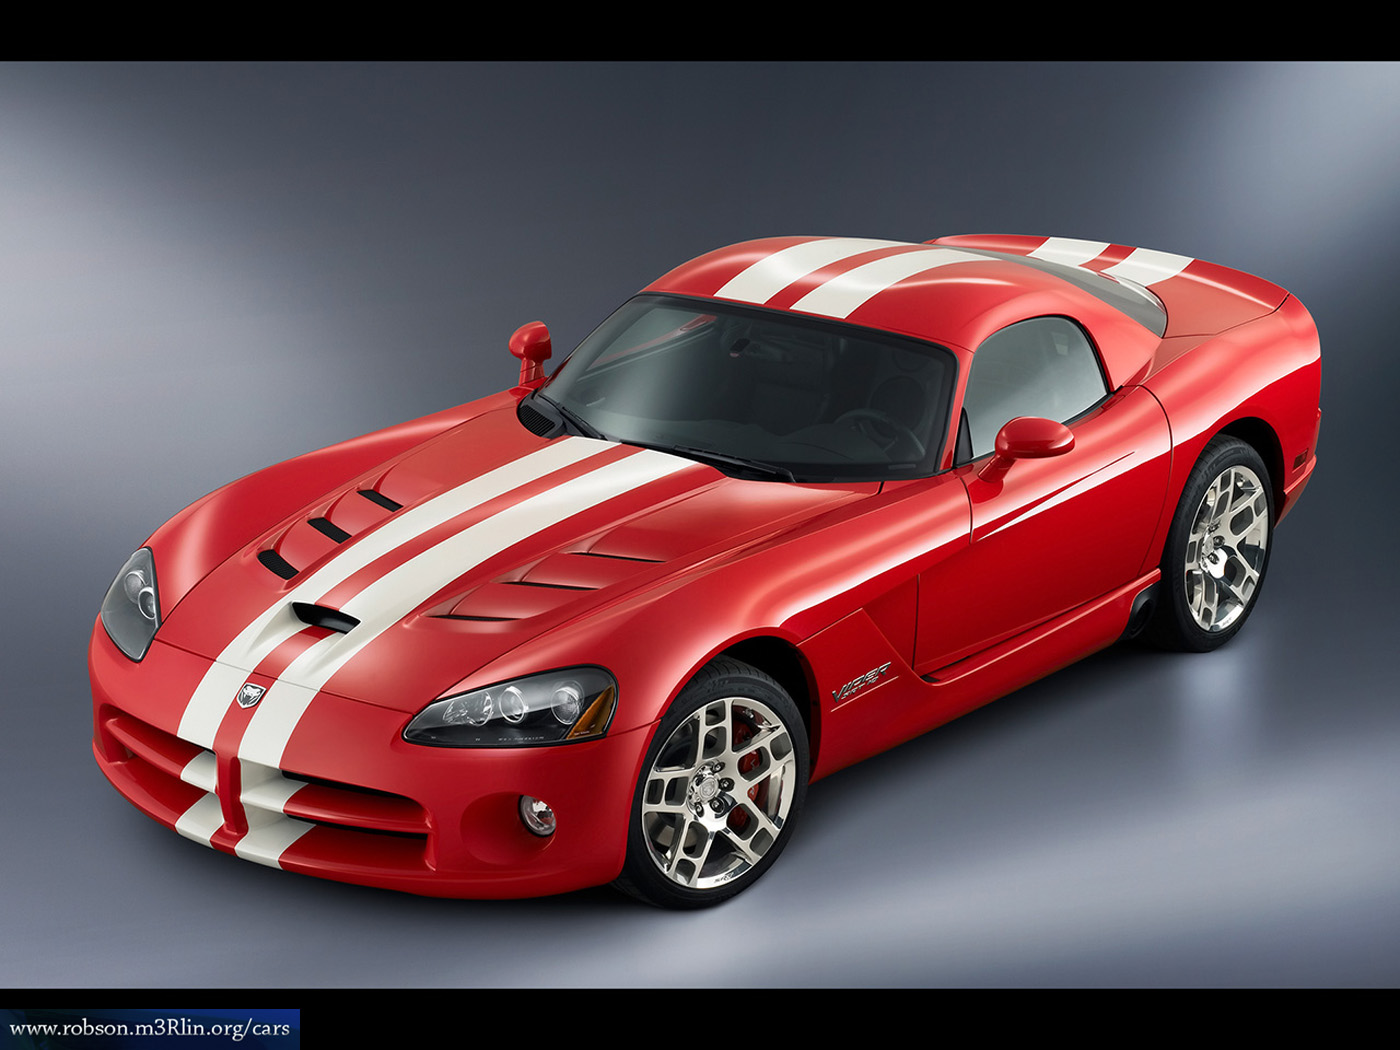 The ride and handling of the 2008 Dodge Viper SRT10 is defined by a